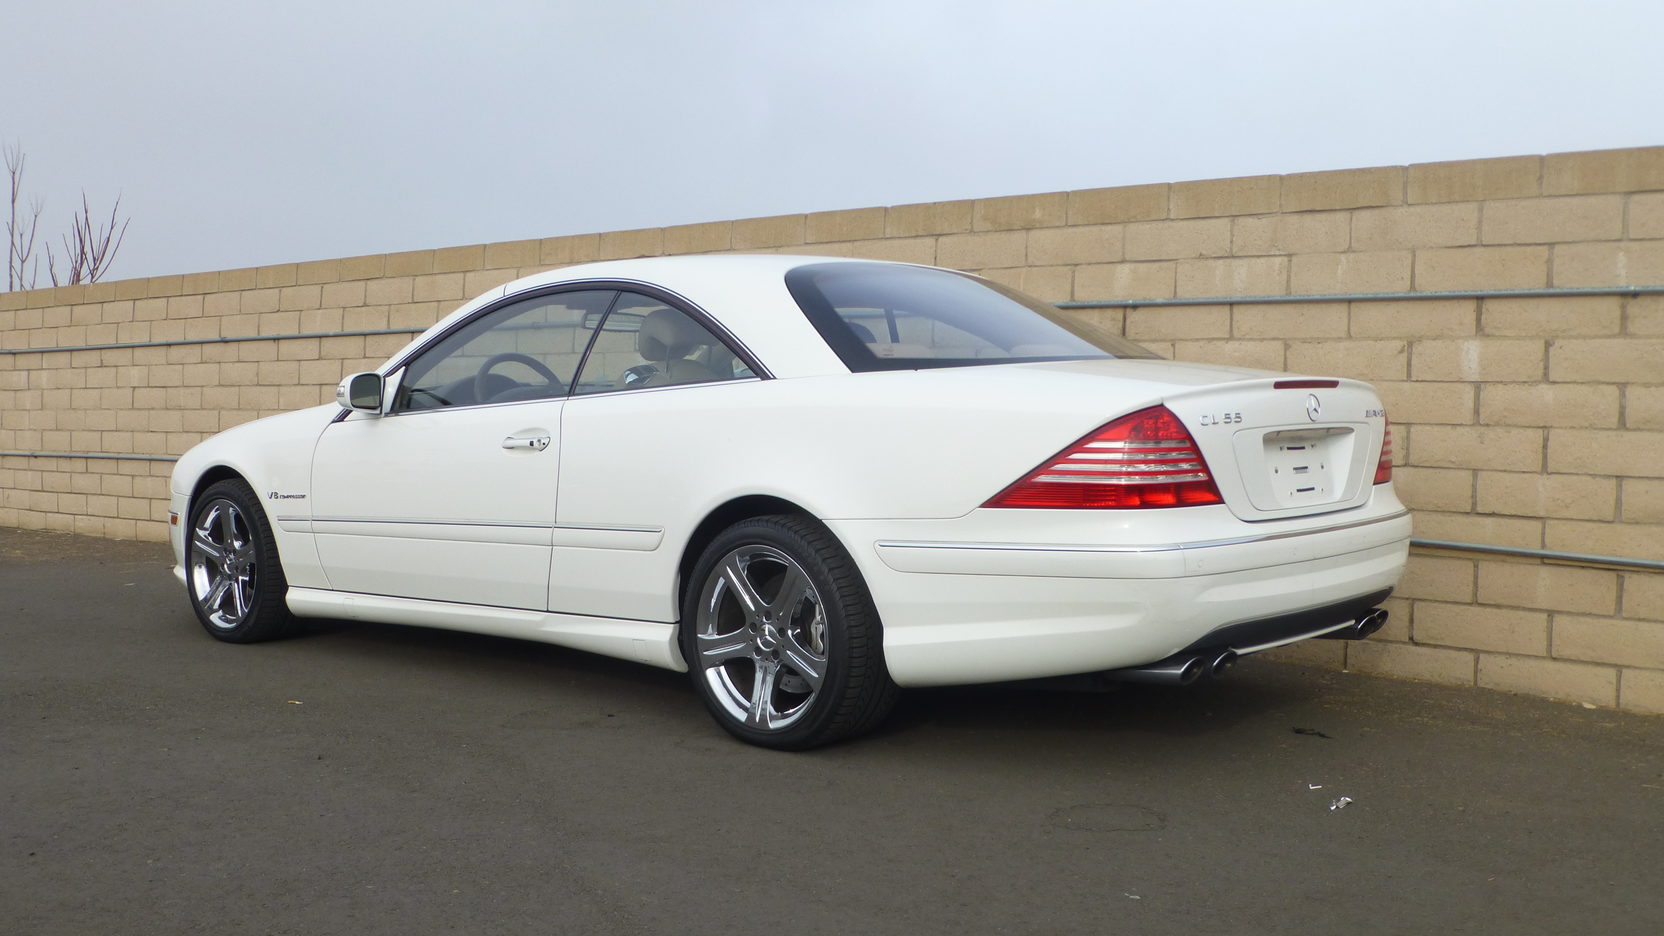 2005 Mercedes-Benz CL55 AMG Coupe | F76 | Houston 2014